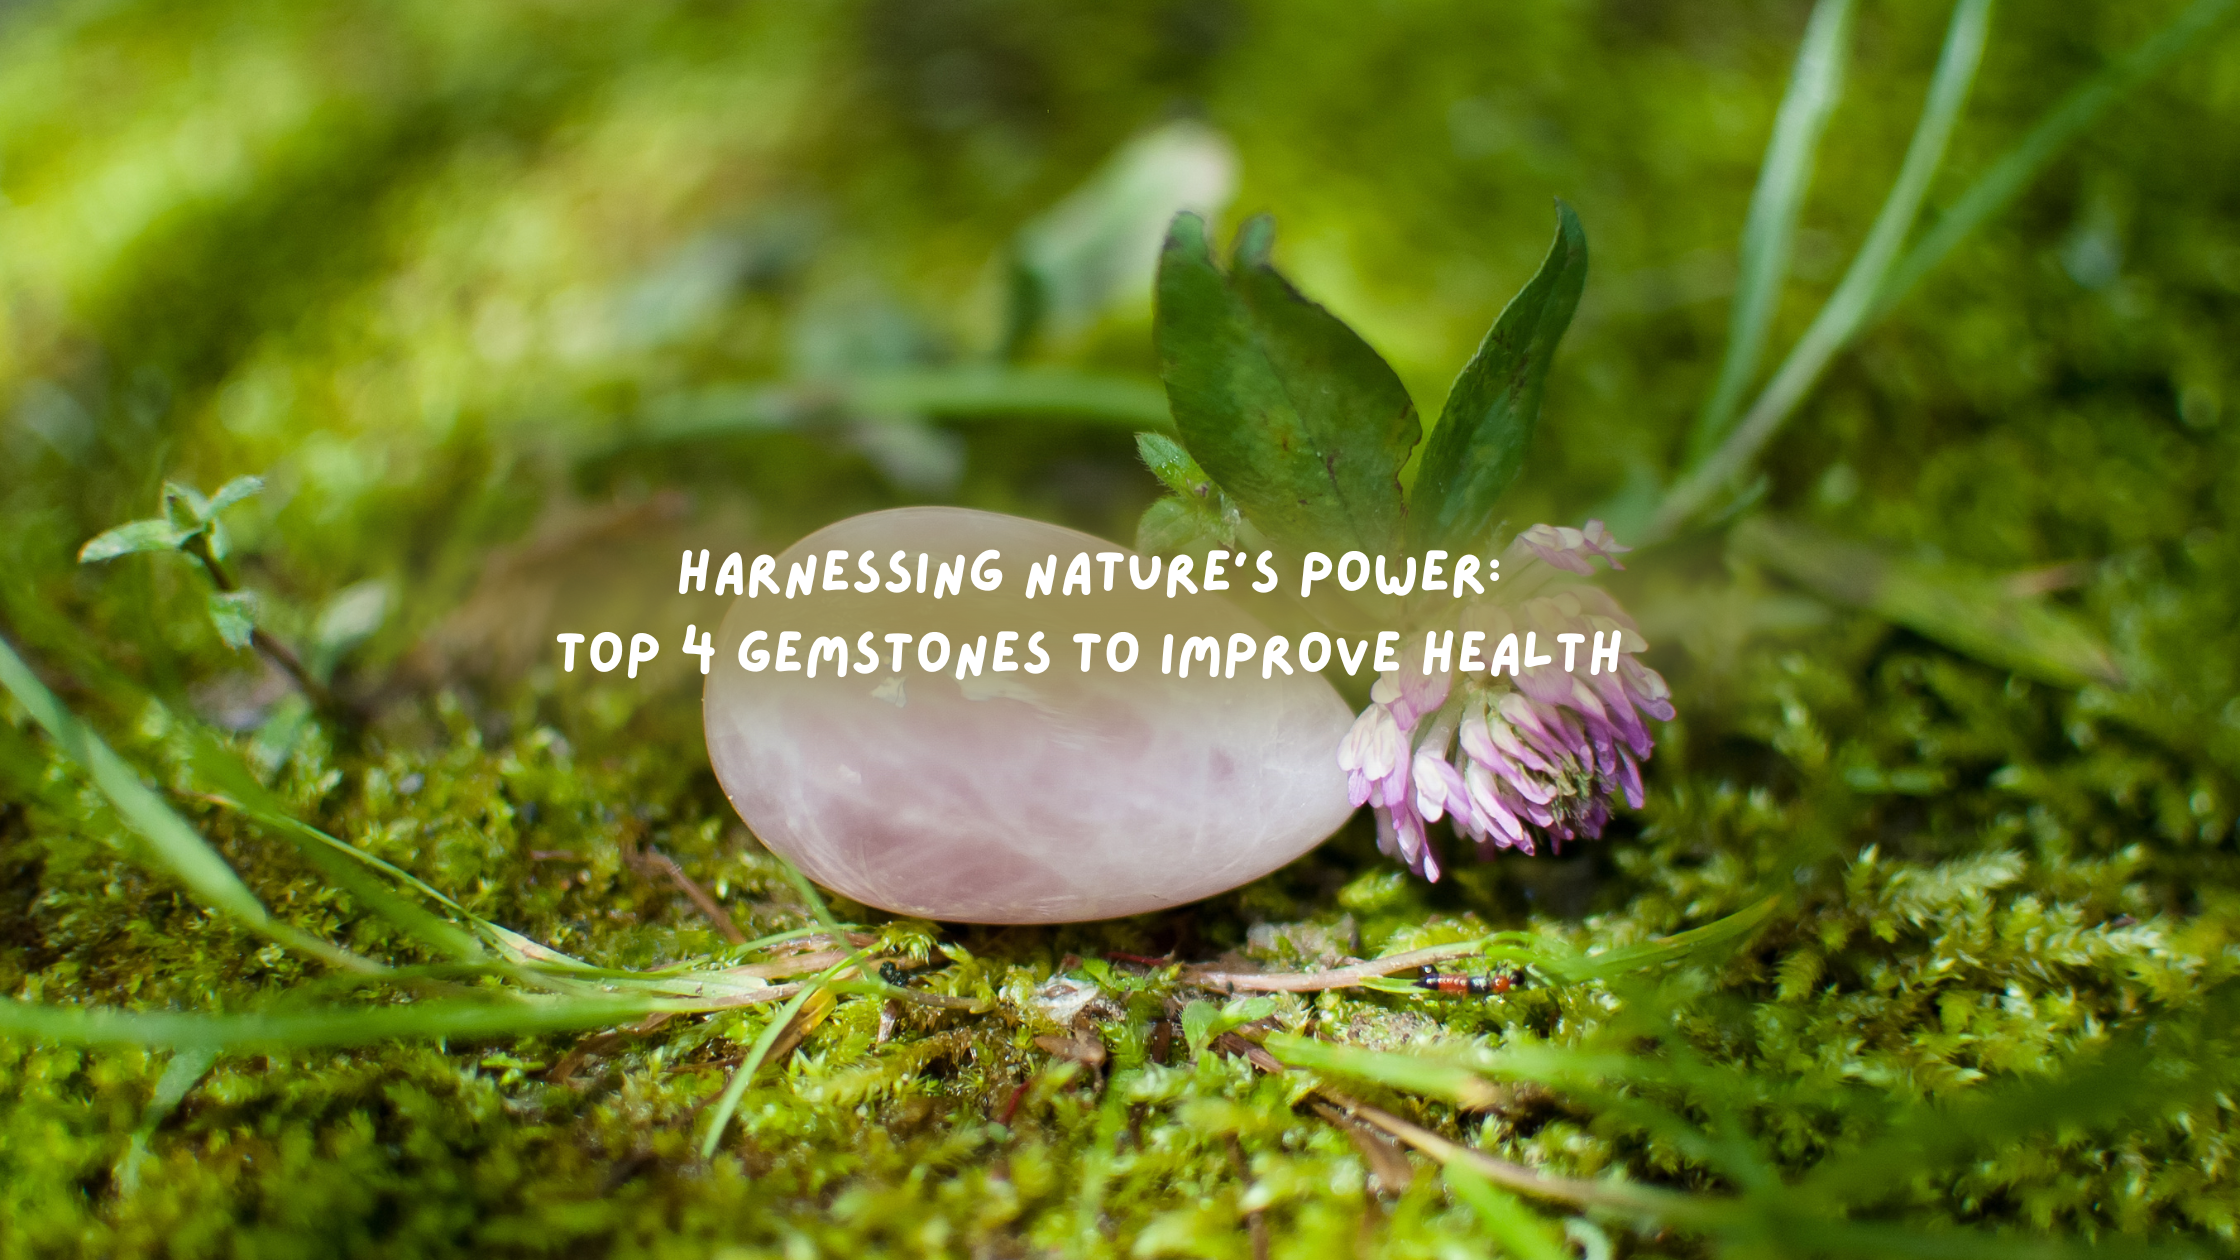 Harnessing Nature's Power: Top 4 Gemstones to Improve Health